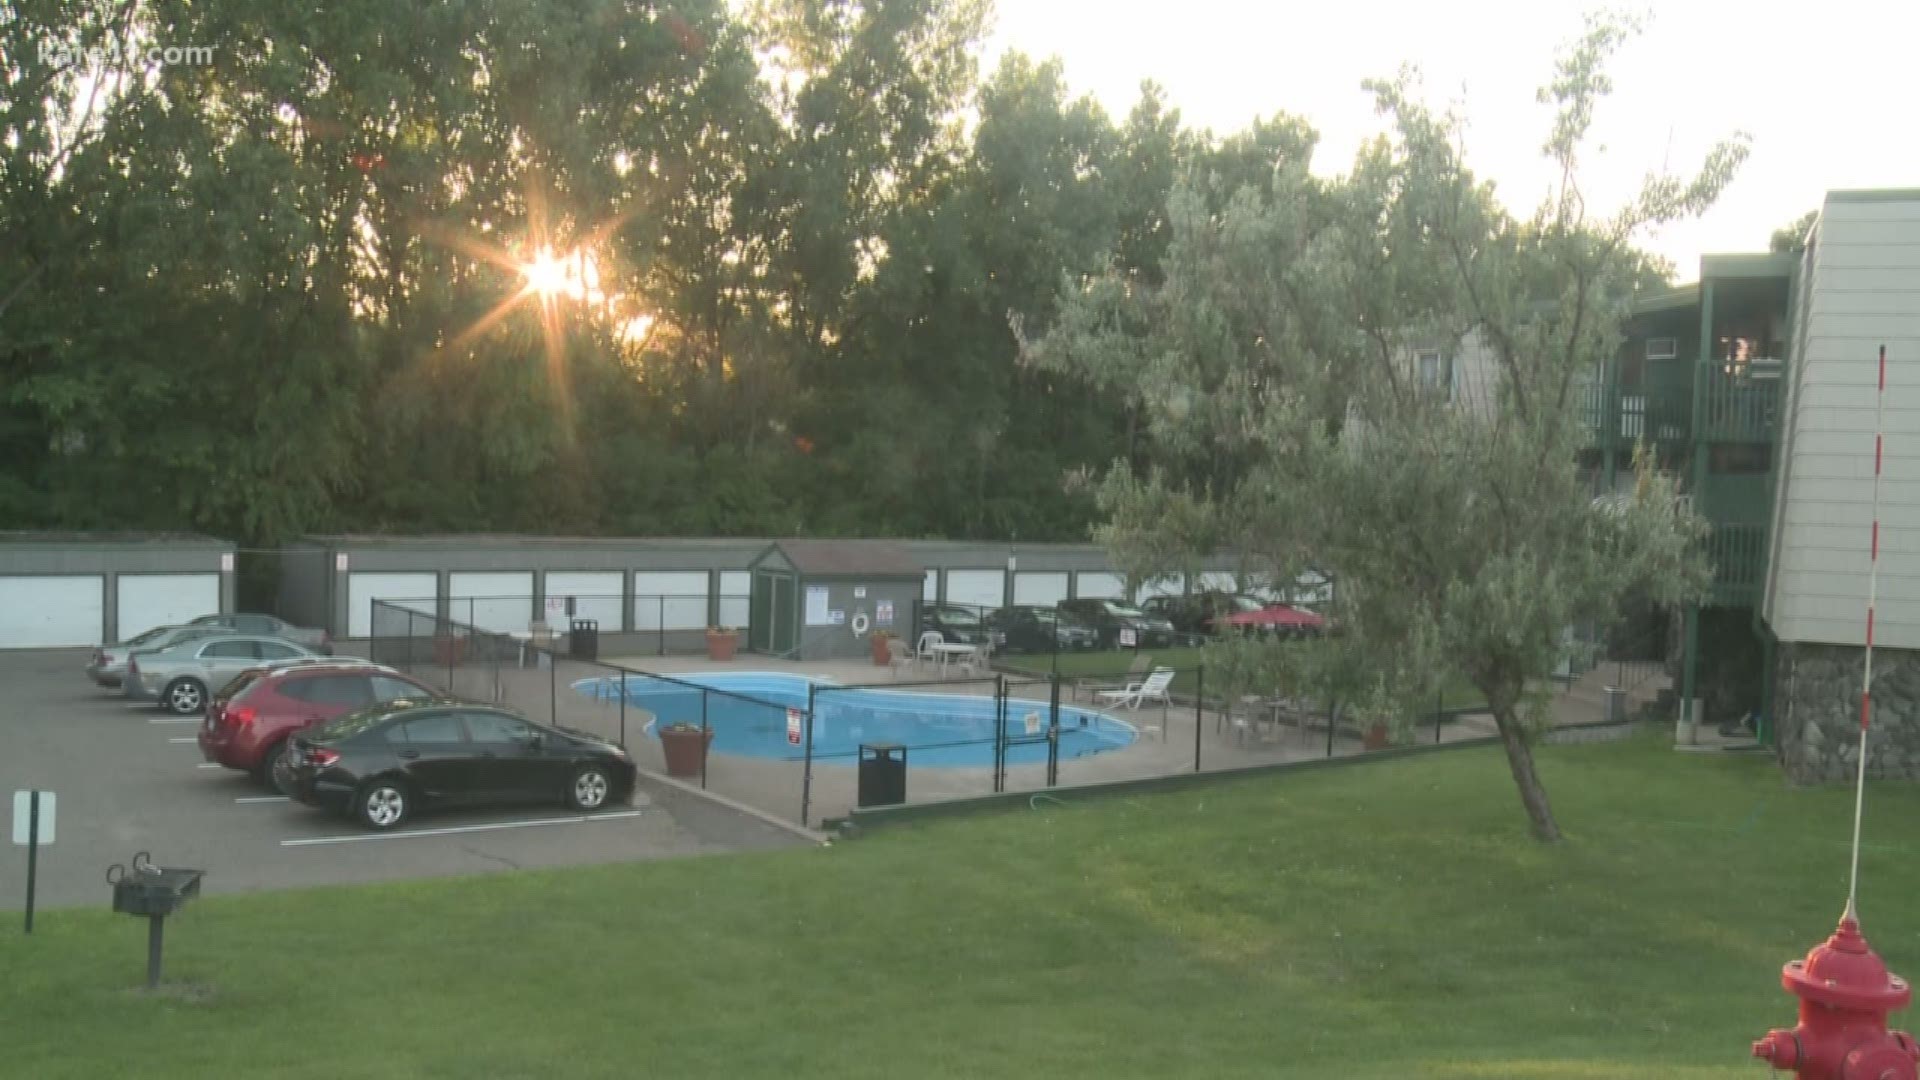 The Ramsey County Sheriff's Office responded to a call of a teen drowning around 5:30 p.m. on Thursday. The incident took place at a pool within the Garden View Apartments in New Brighton. The victim is currently in critical condition.